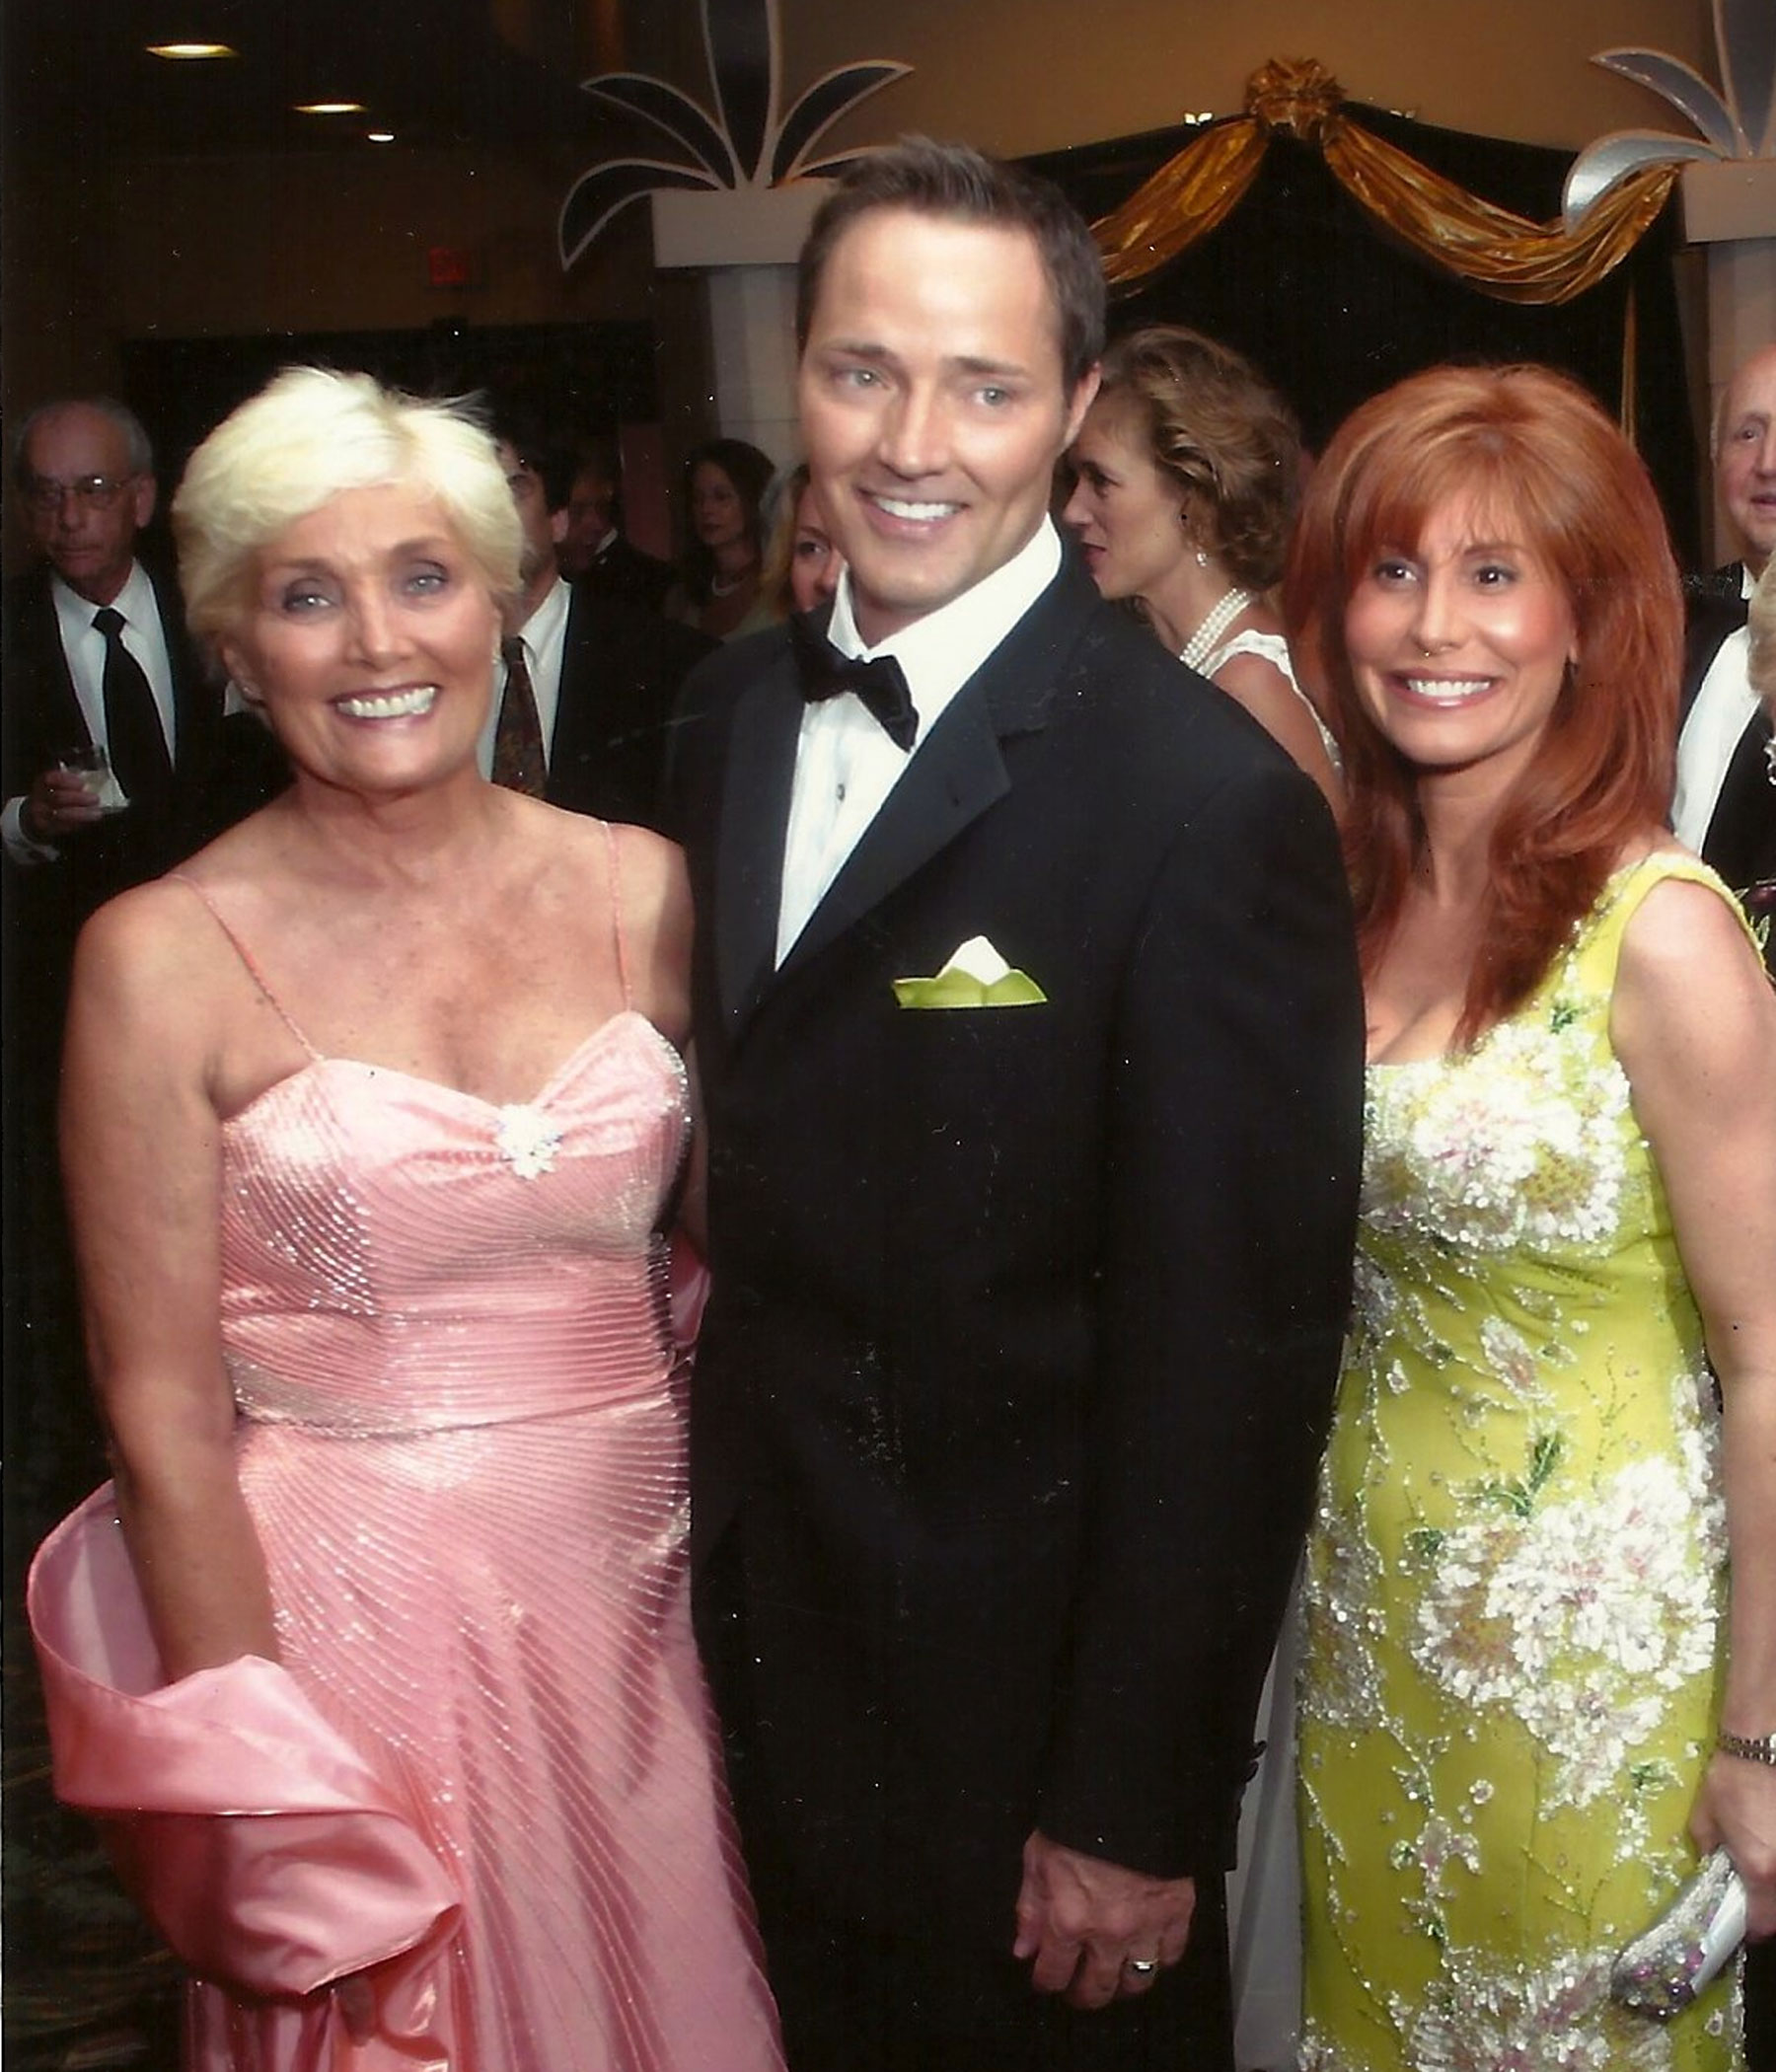 Palm Beach Film Festival Gala with his mother Arlene Piazza and Suzanne Delaurentiis